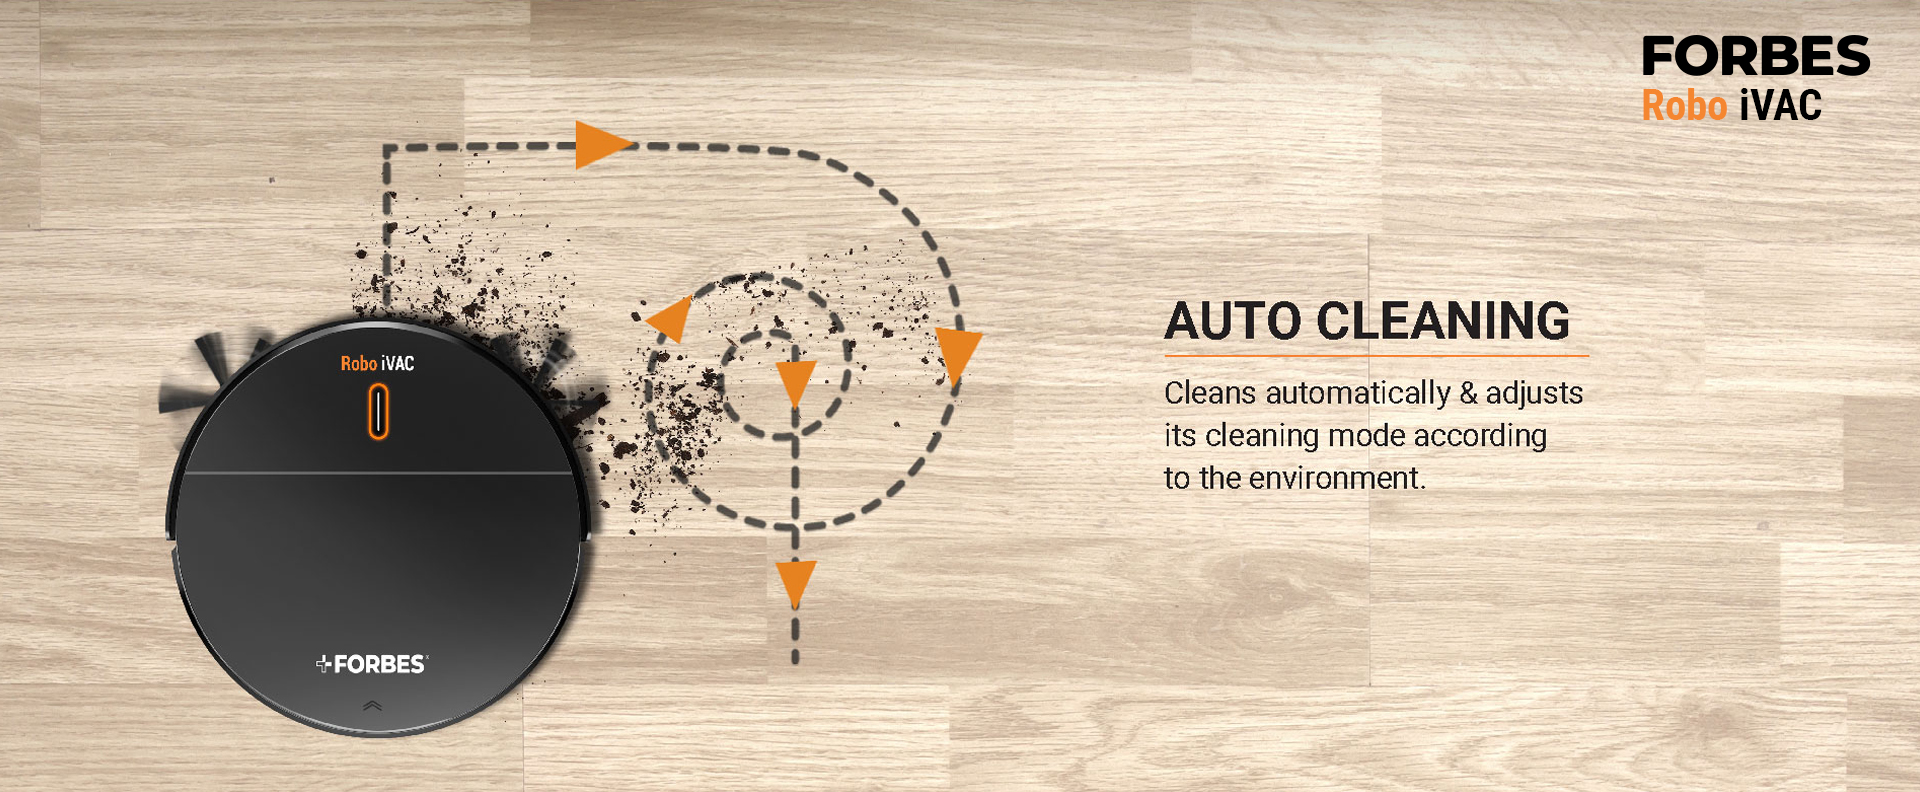 Cleans automatically & adjusts its cleaning mode according to the environment.